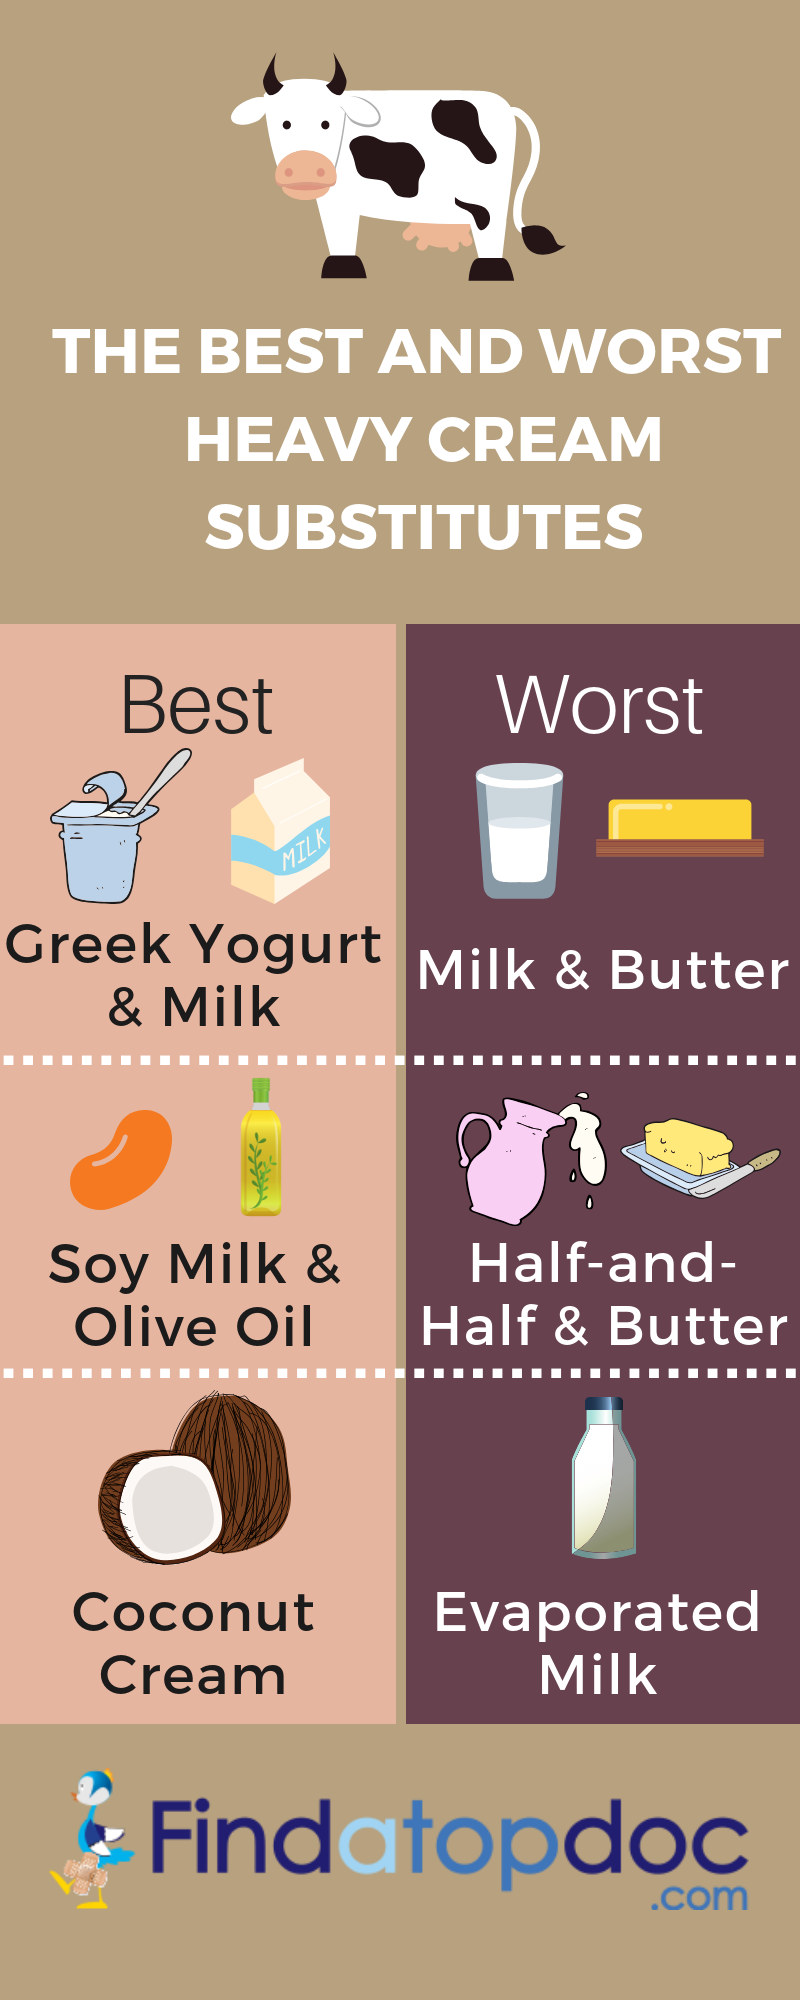 Best and Worst Substitutes for Heavy Cream